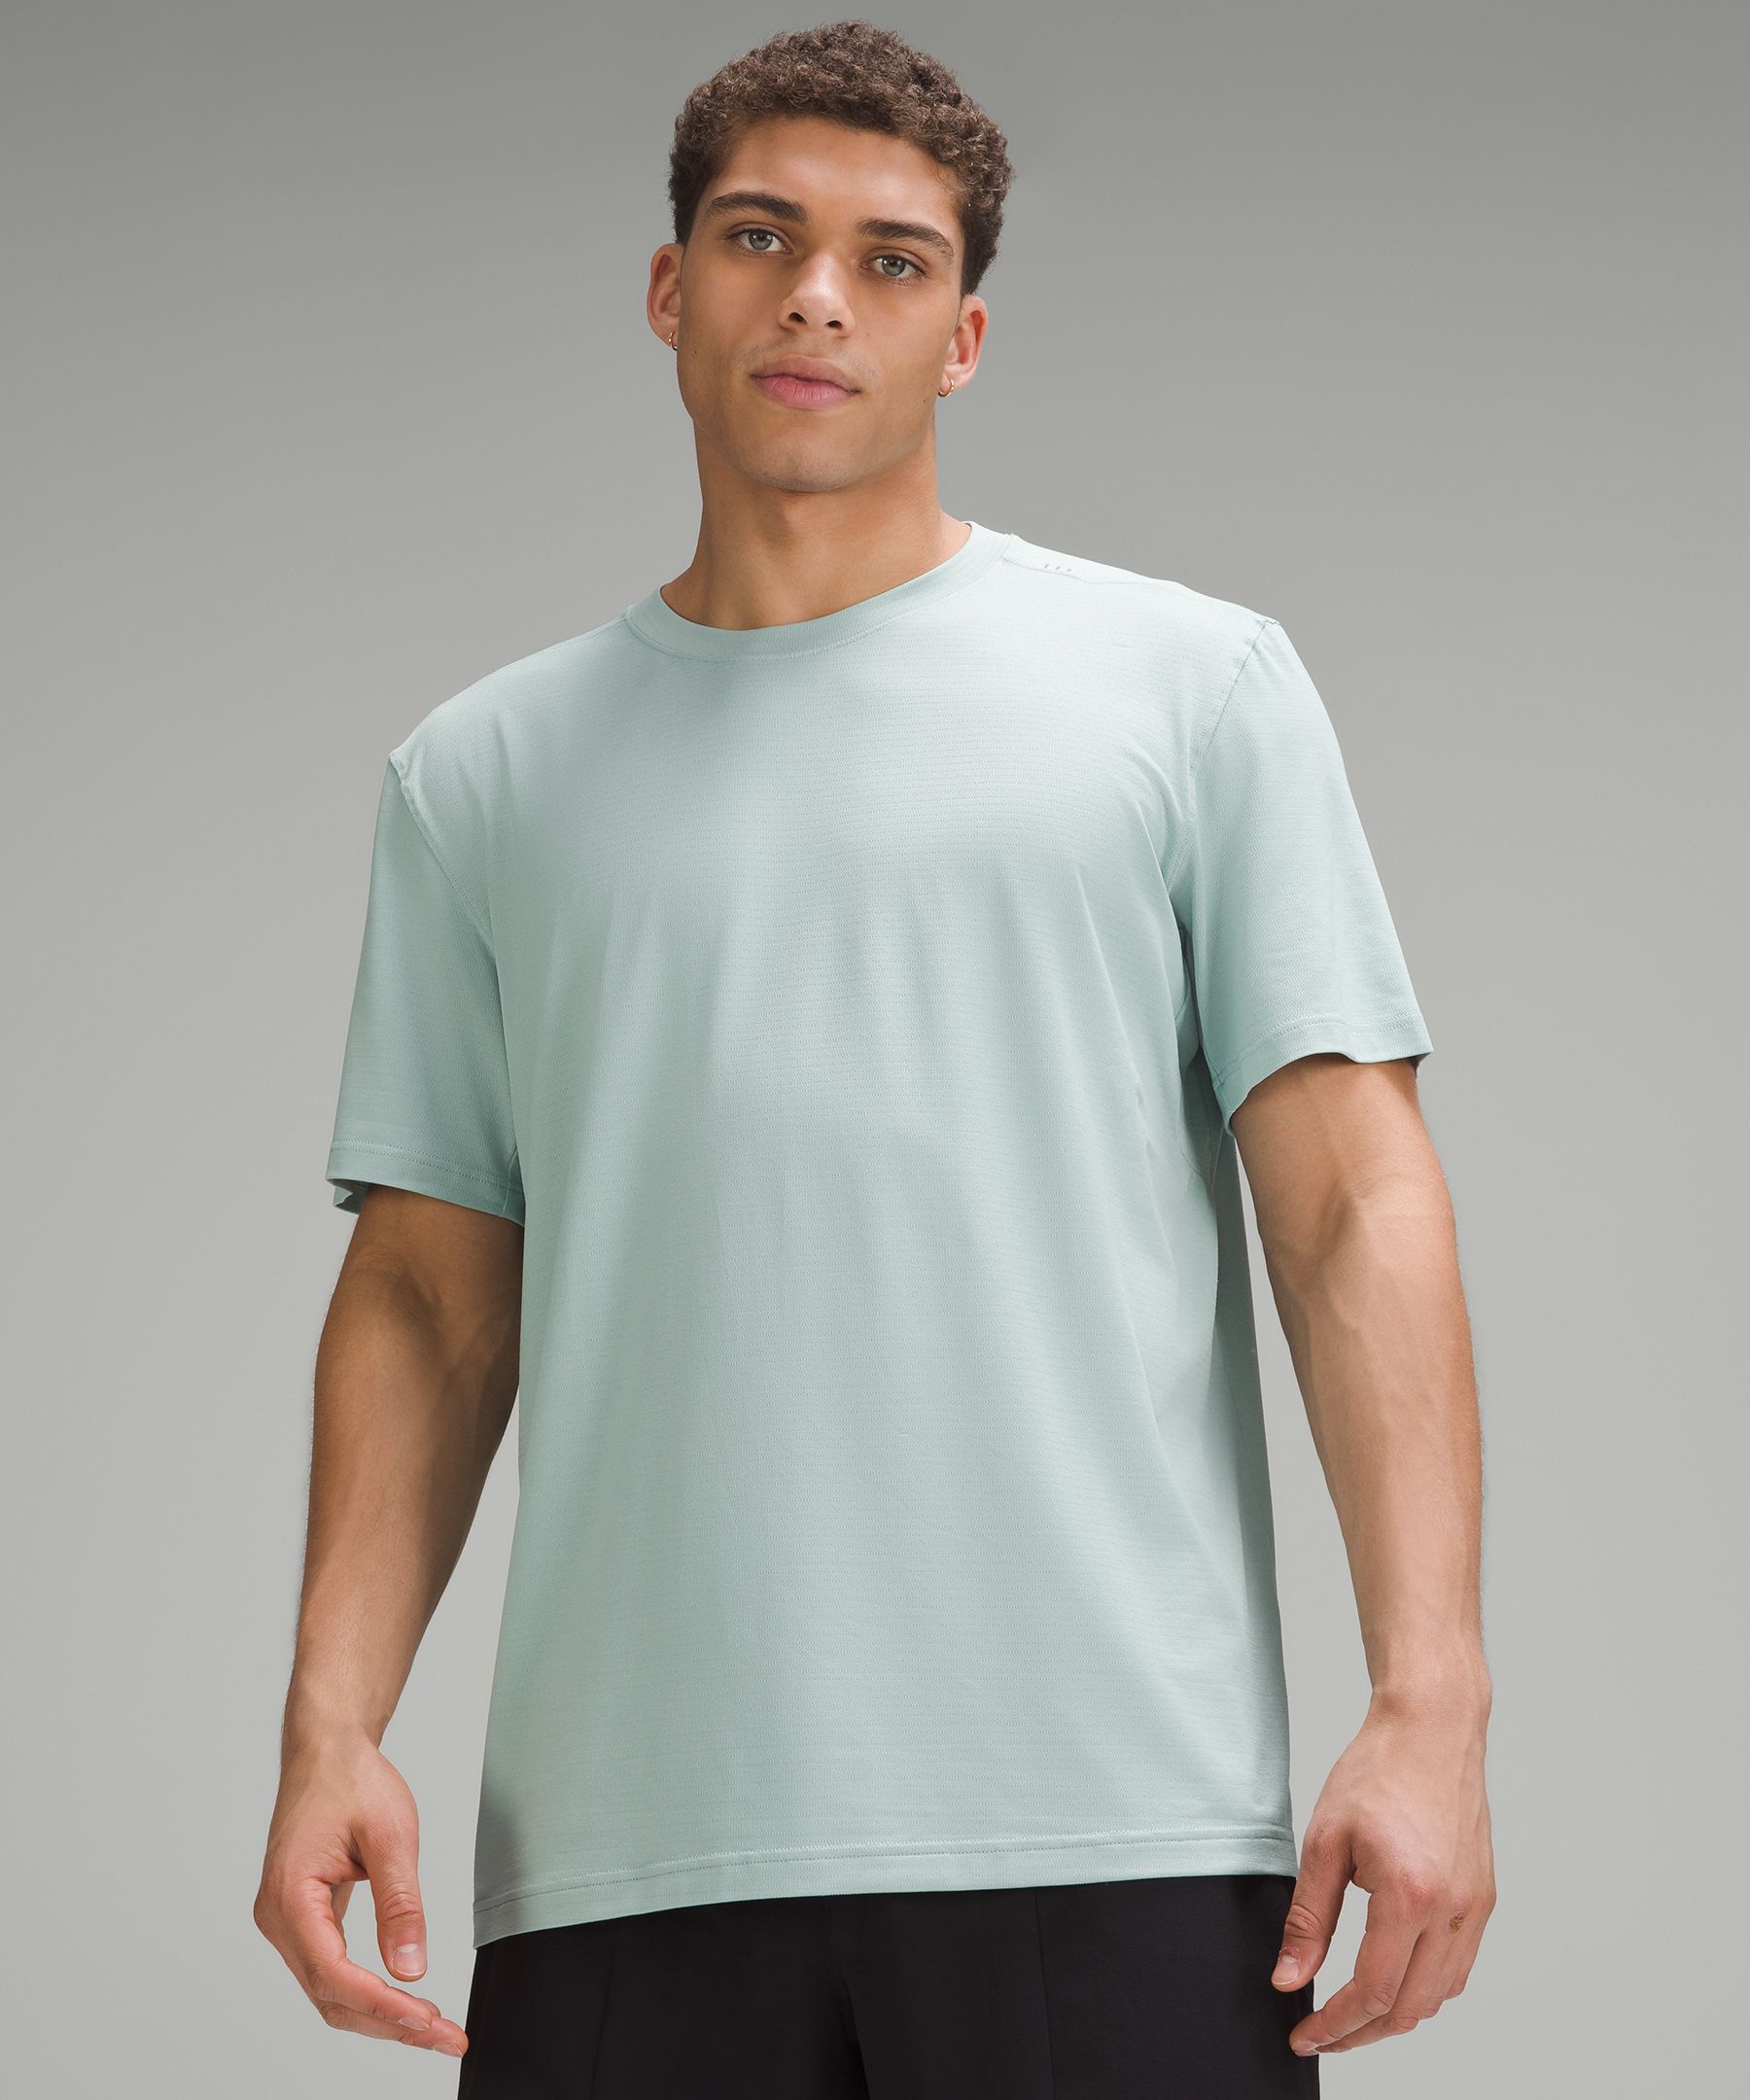 License to Train Relaxed Short-Sleeve Shirt | Men's Short Sleeve Shirts & Tee's